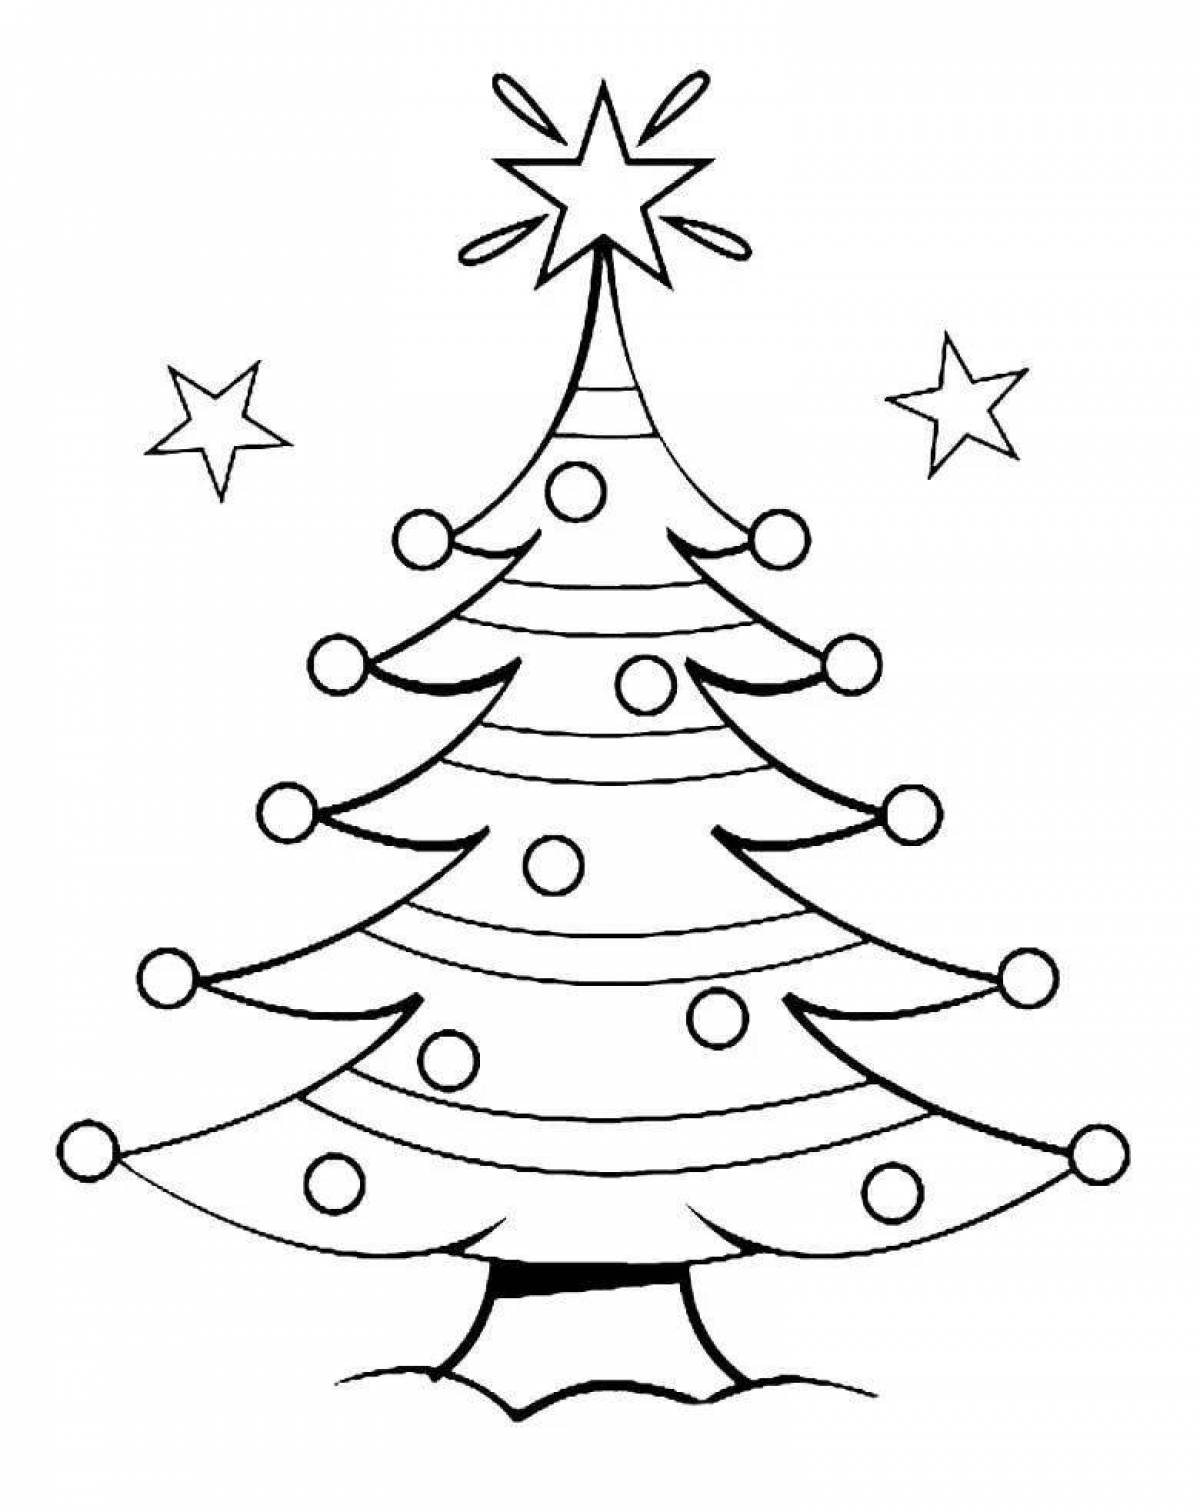 A beautifully colored Christmas tree coloring page